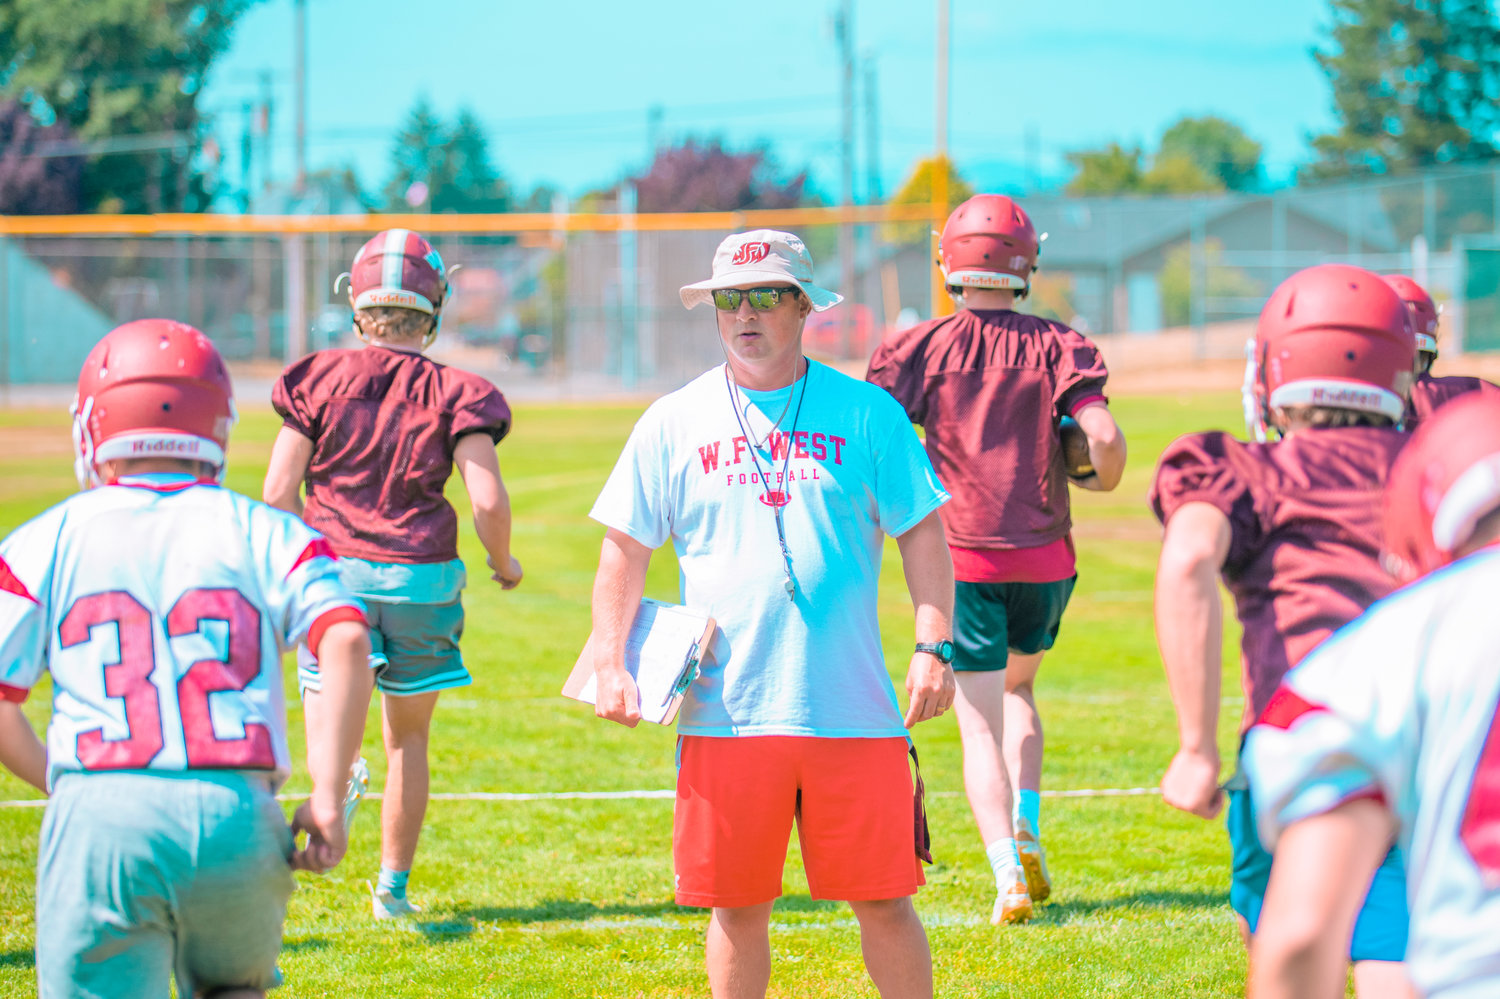 W.F. West football coach Dan Hill watches his team run drills during the opening day of practice on Wednesday.